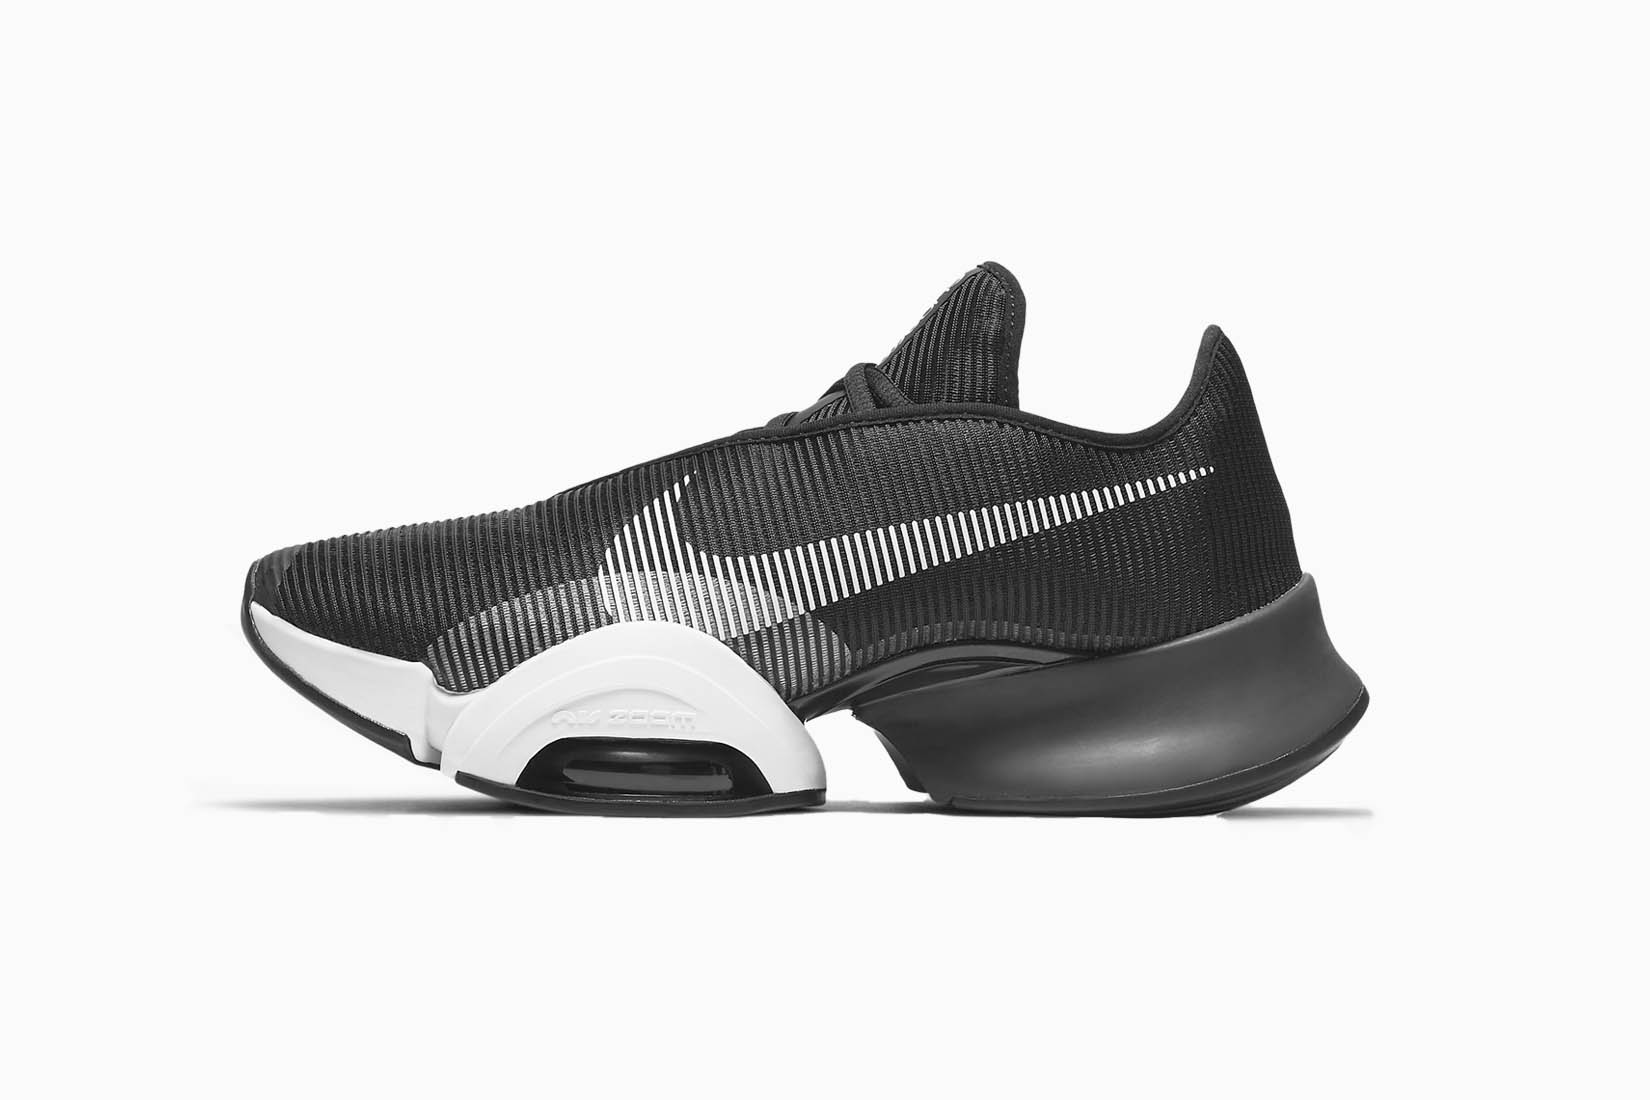 13 nike running shoes training Best Men's Nike Running Shoes For Every Type Of Run (2021)